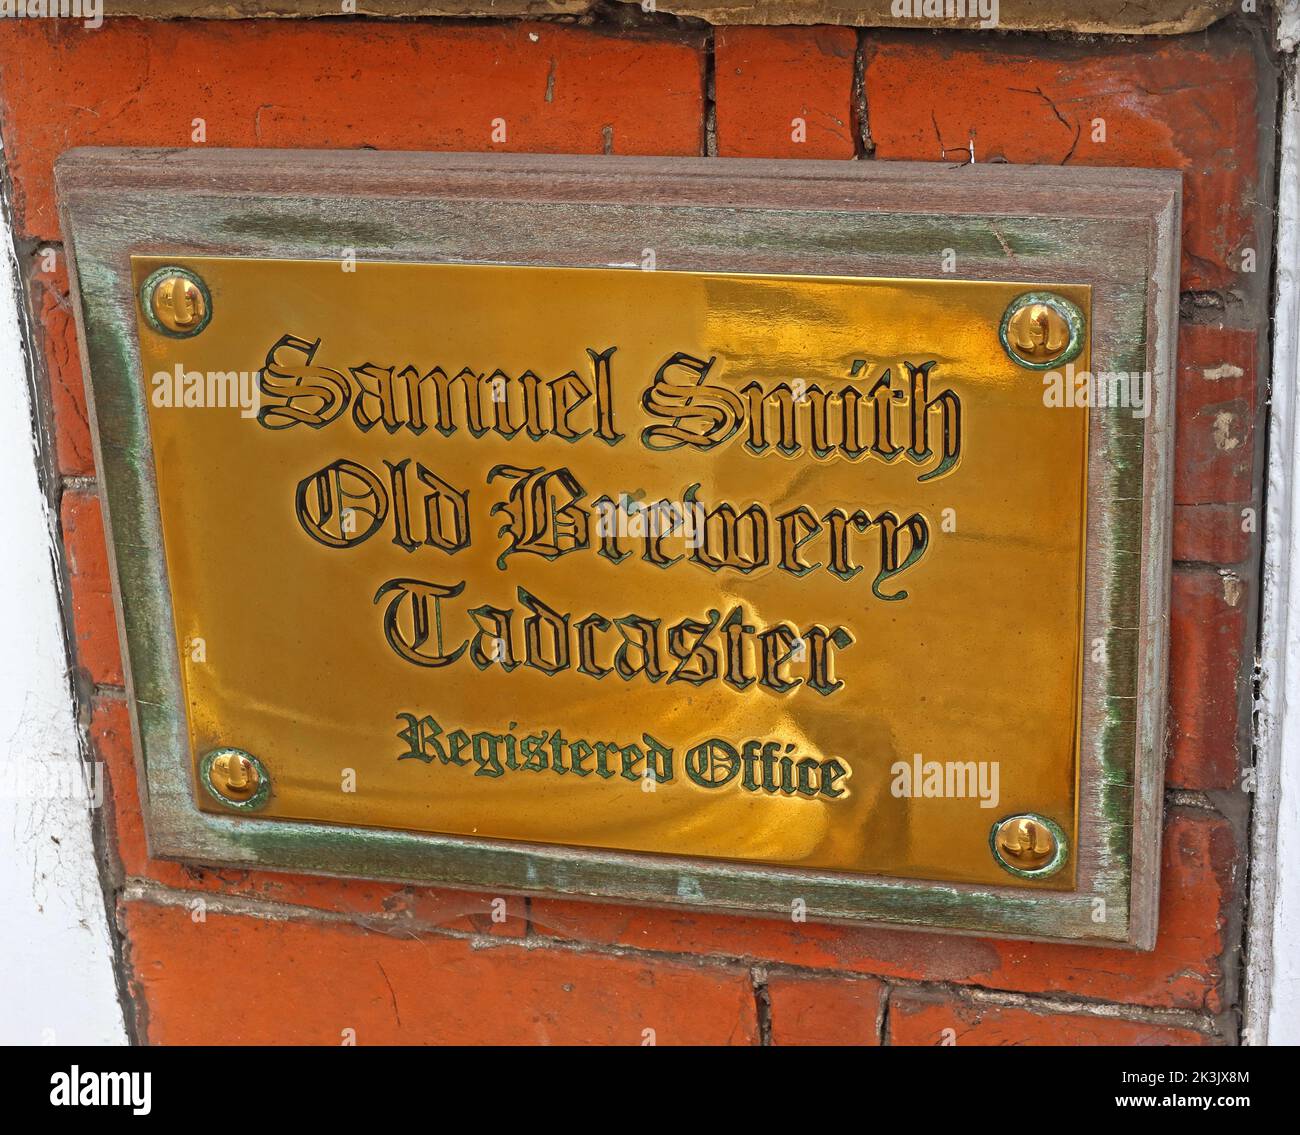 Plaque de laiton, Samuel Smith, Old Brewery, Tadcaster, siège social, High St, Tadcaster, Yorkshire du Nord, Angleterre, Royaume-Uni, LS24 9SB Banque D'Images